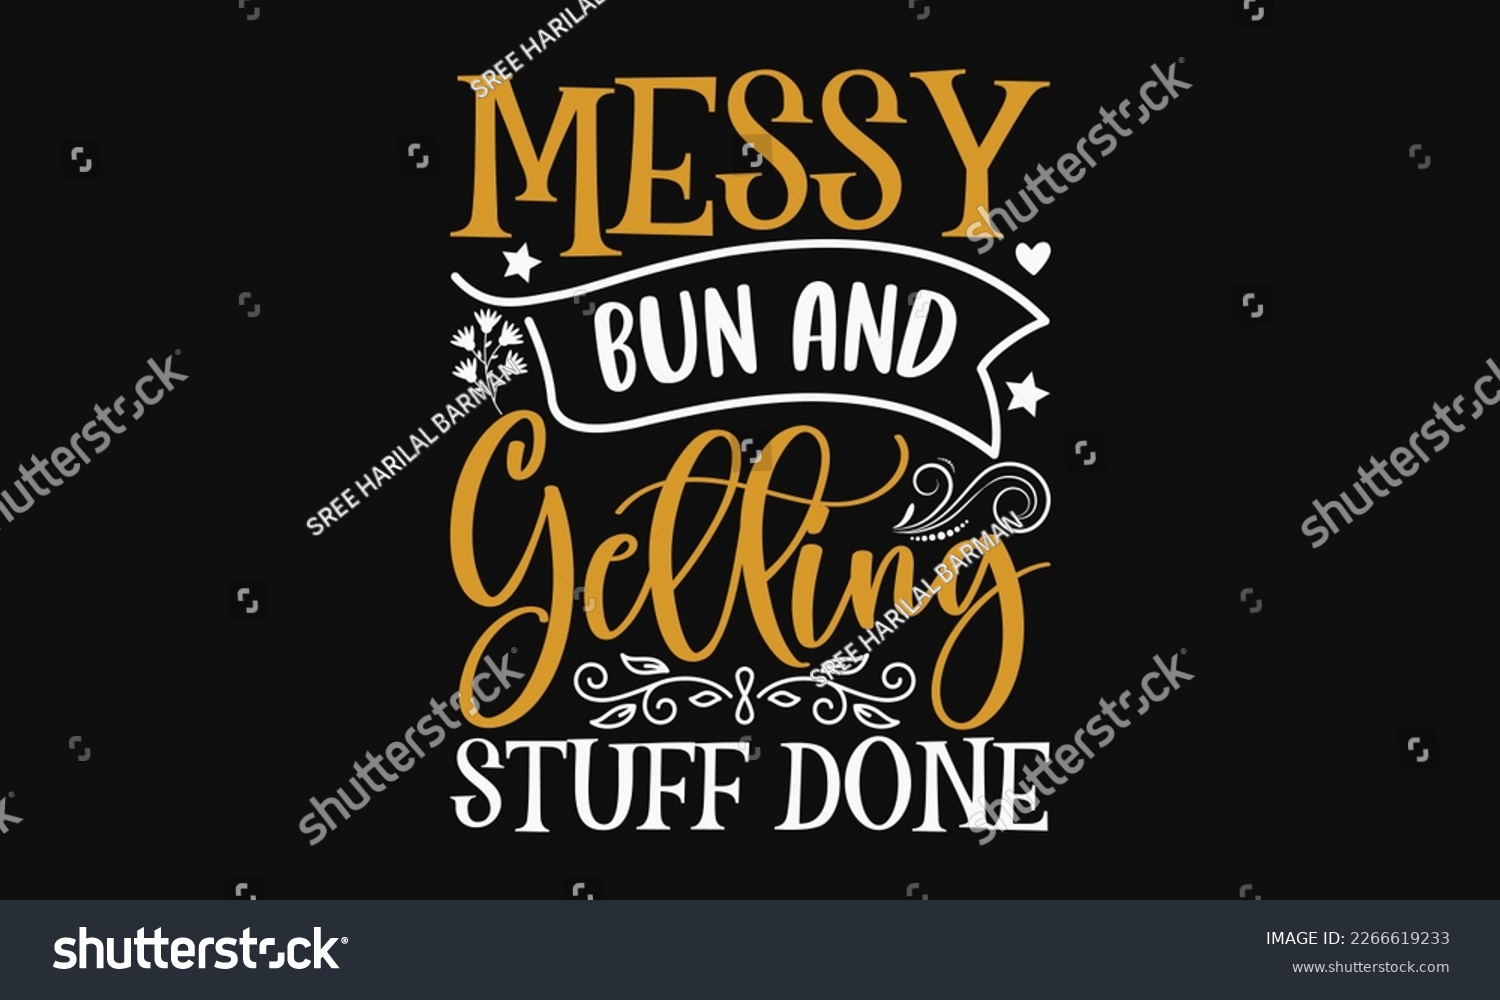 SVG of Messy bun and getting stuff done - Mother's Day Svg t-shirt design. Hand Drawn Lettering Phrases, Calligraphy T-Shirt Design, Ornate Background, Handwritten Vector, EPS 10. svg